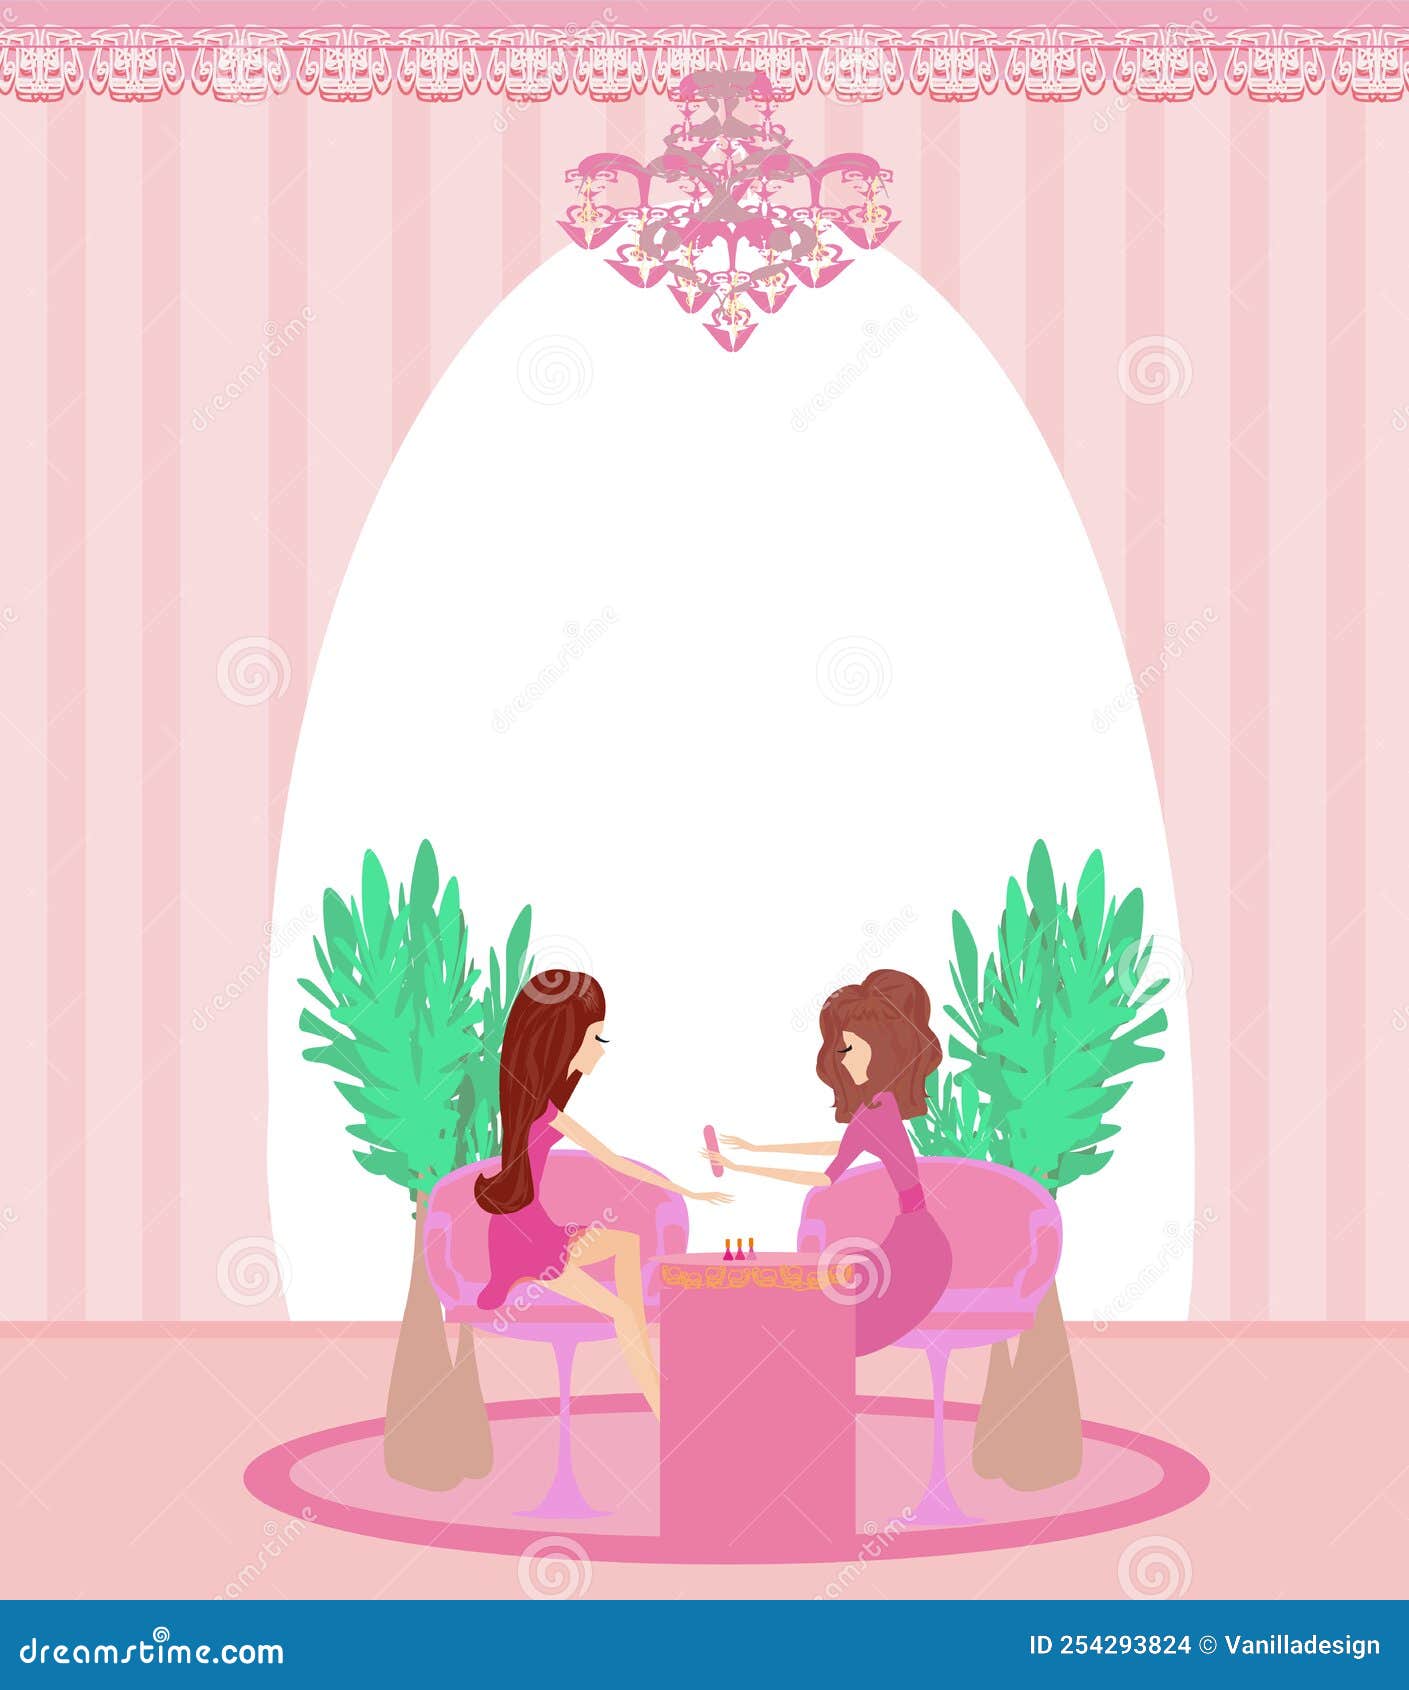 manicure in beauty salon card - place for your text